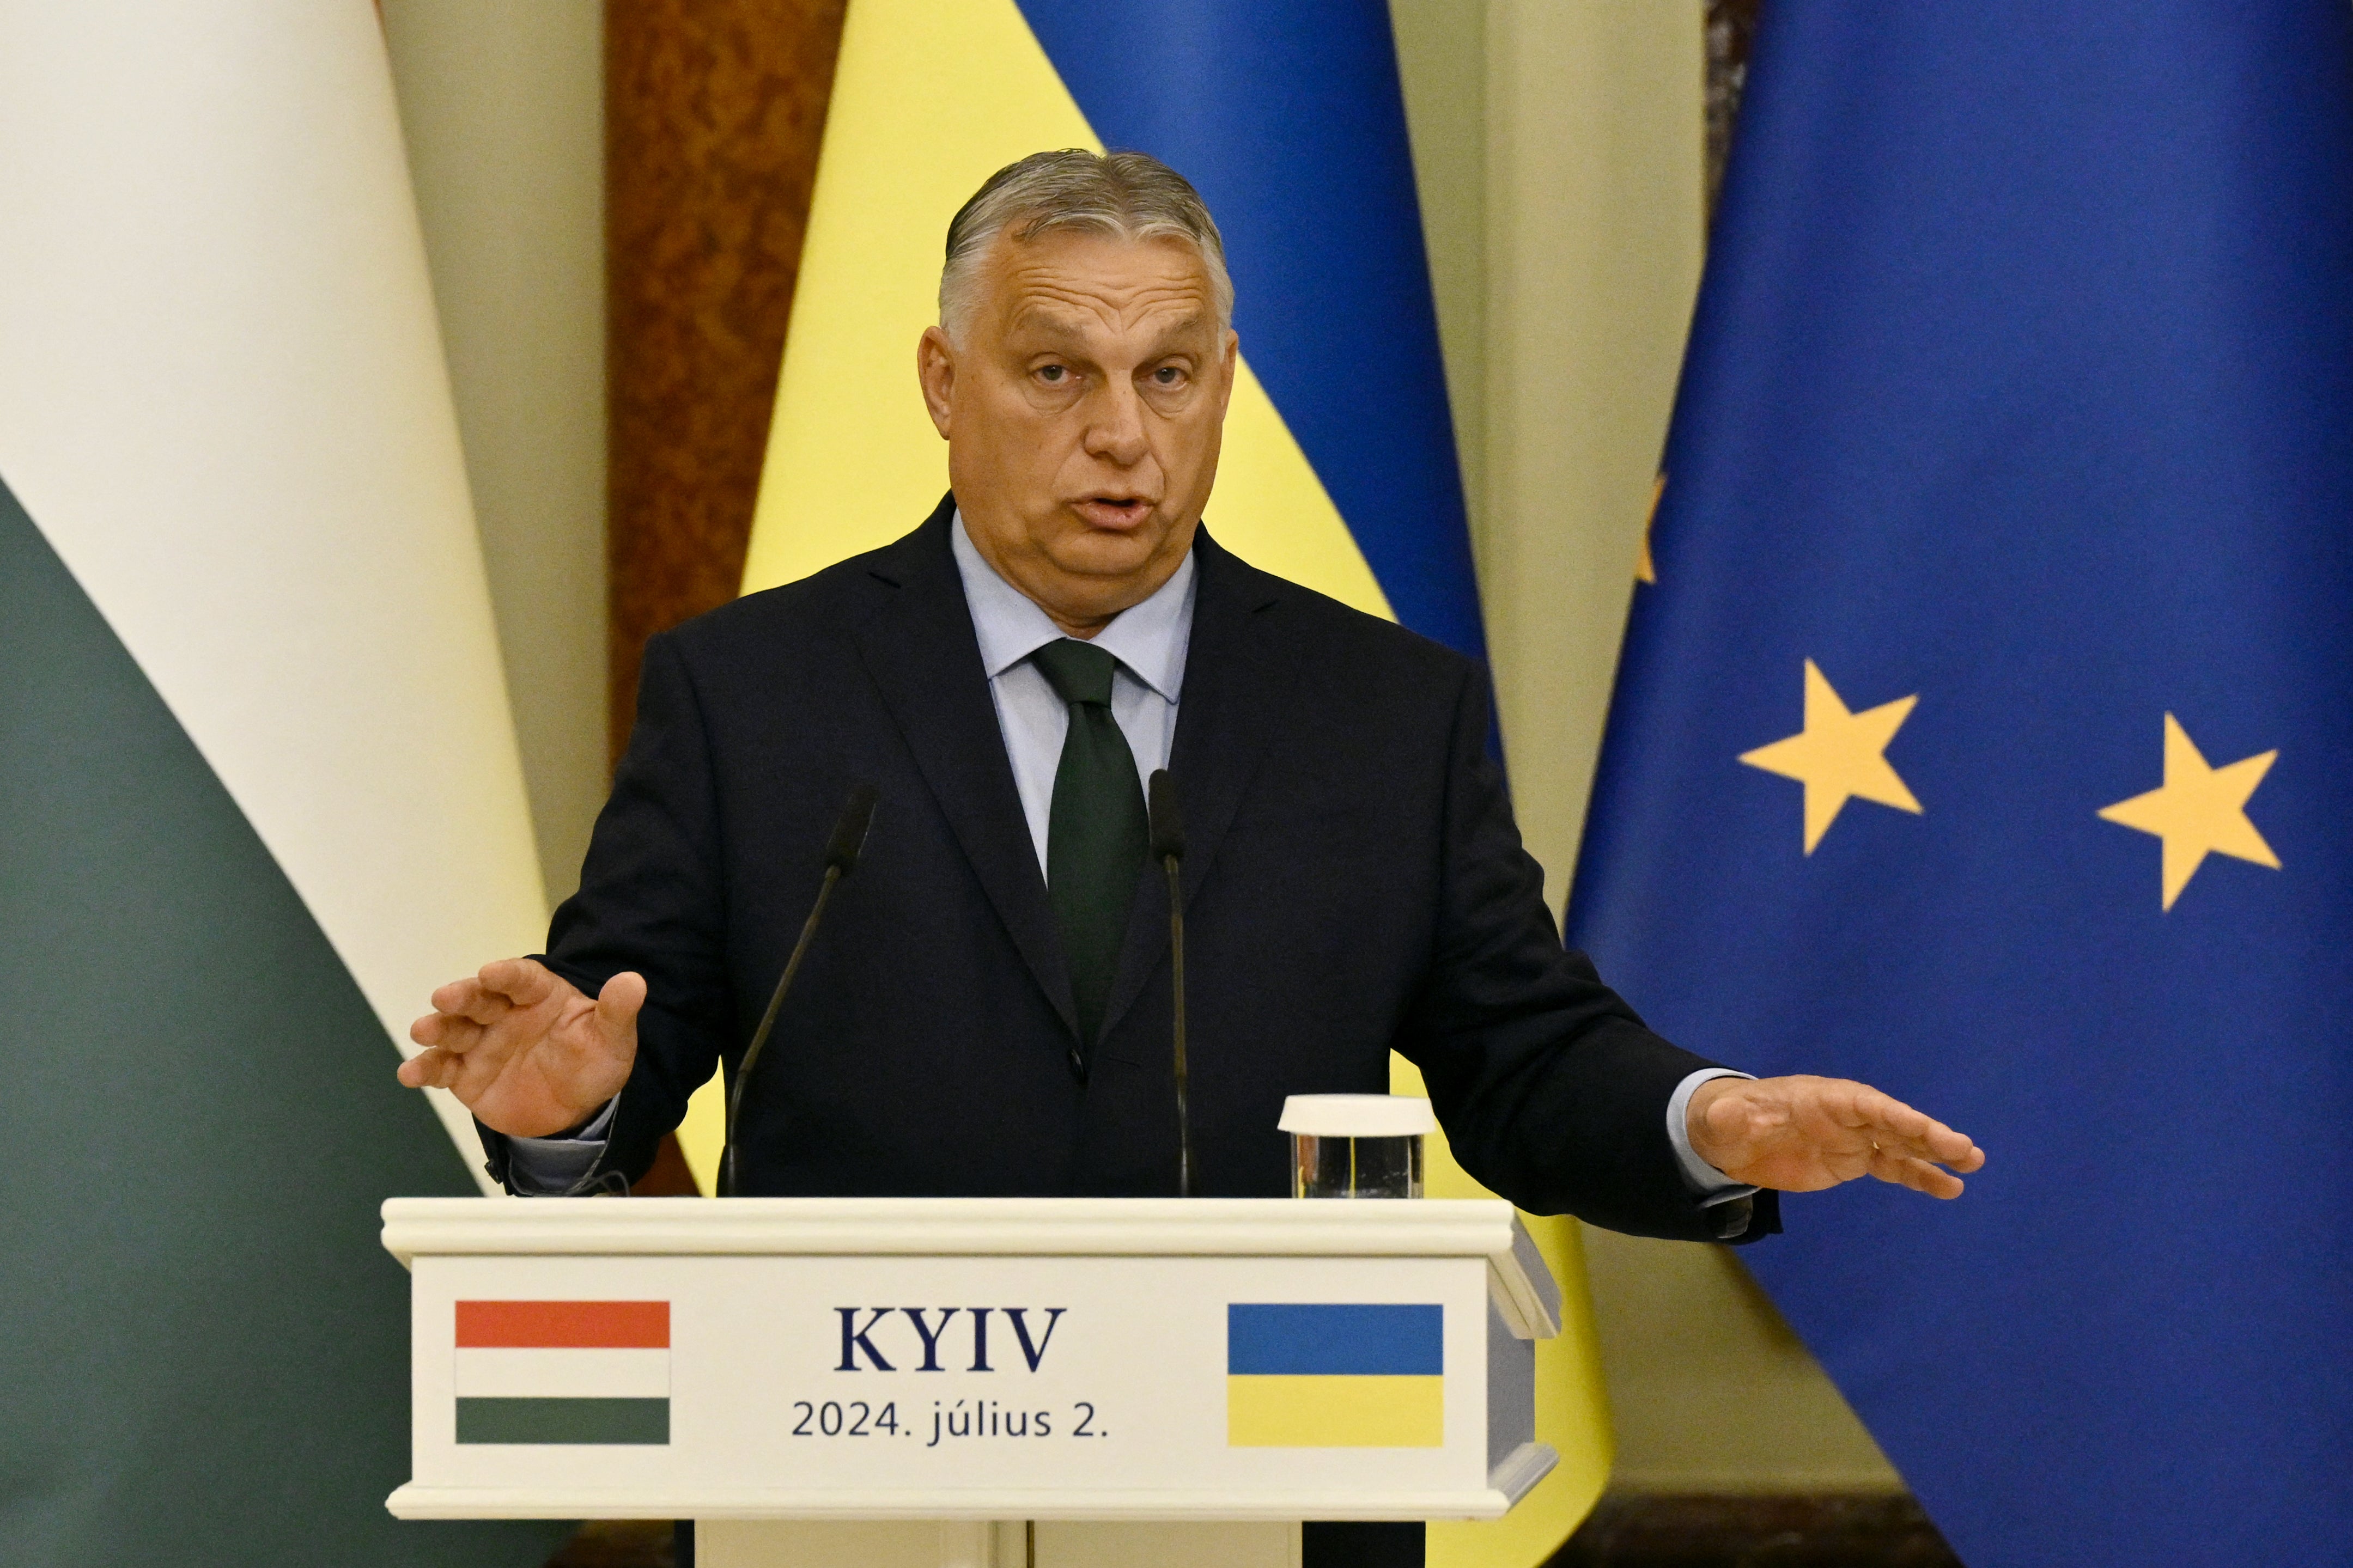 Hungary's prime minister Viktor Orban delivers a press conference with Ukraine's president in Kyiv